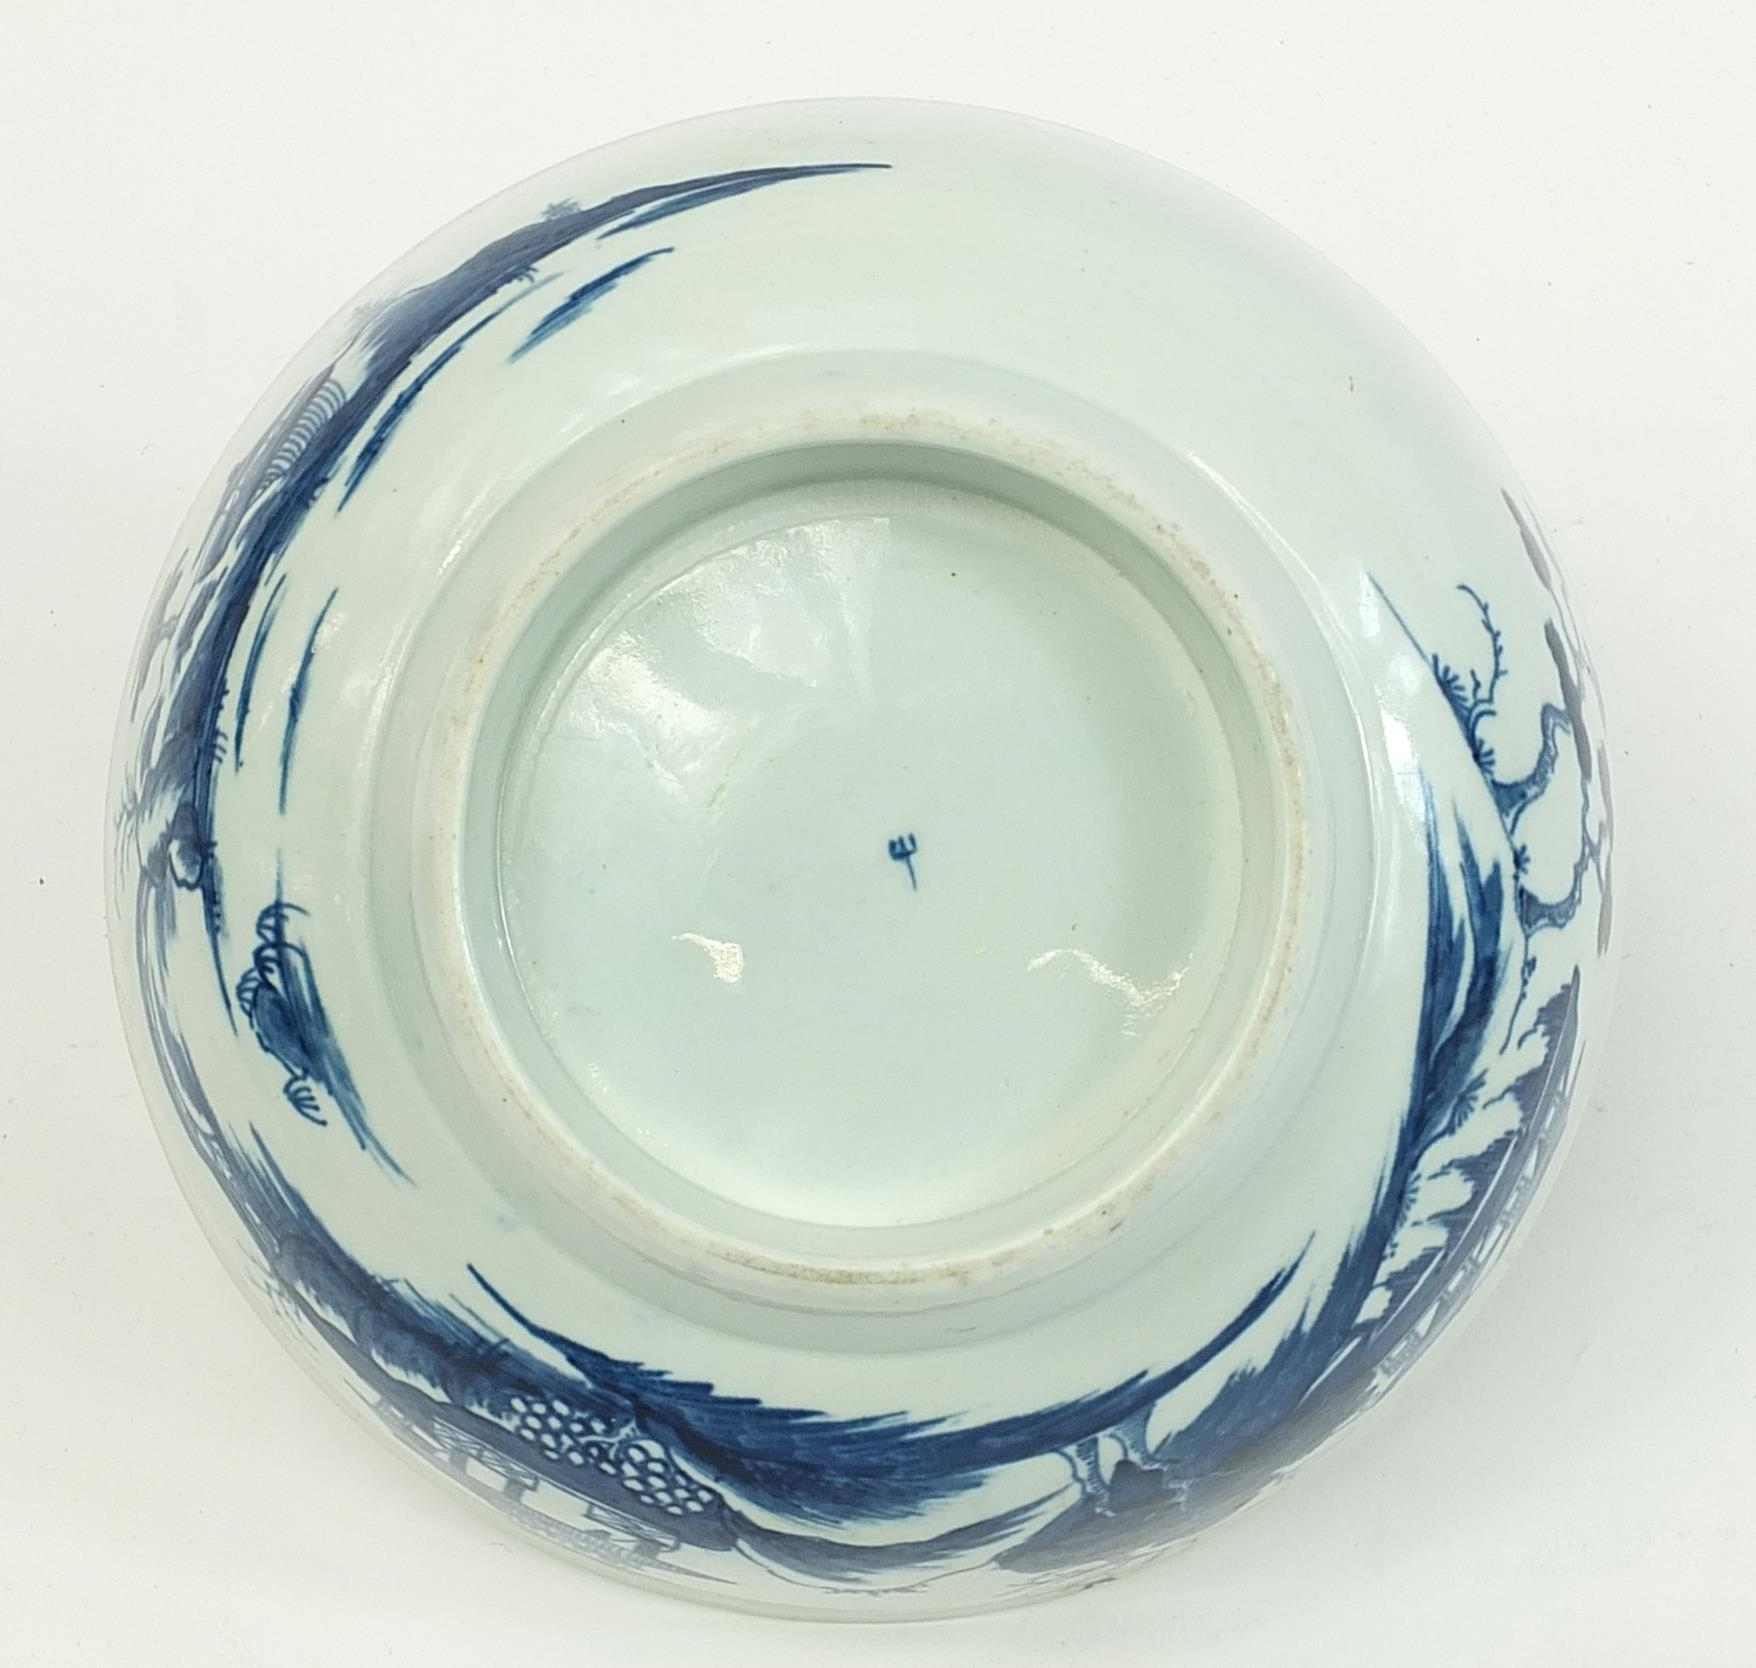 19th century English blue and white porcelain bowl hand painted in the chinoiserie manner with a - Image 3 of 3